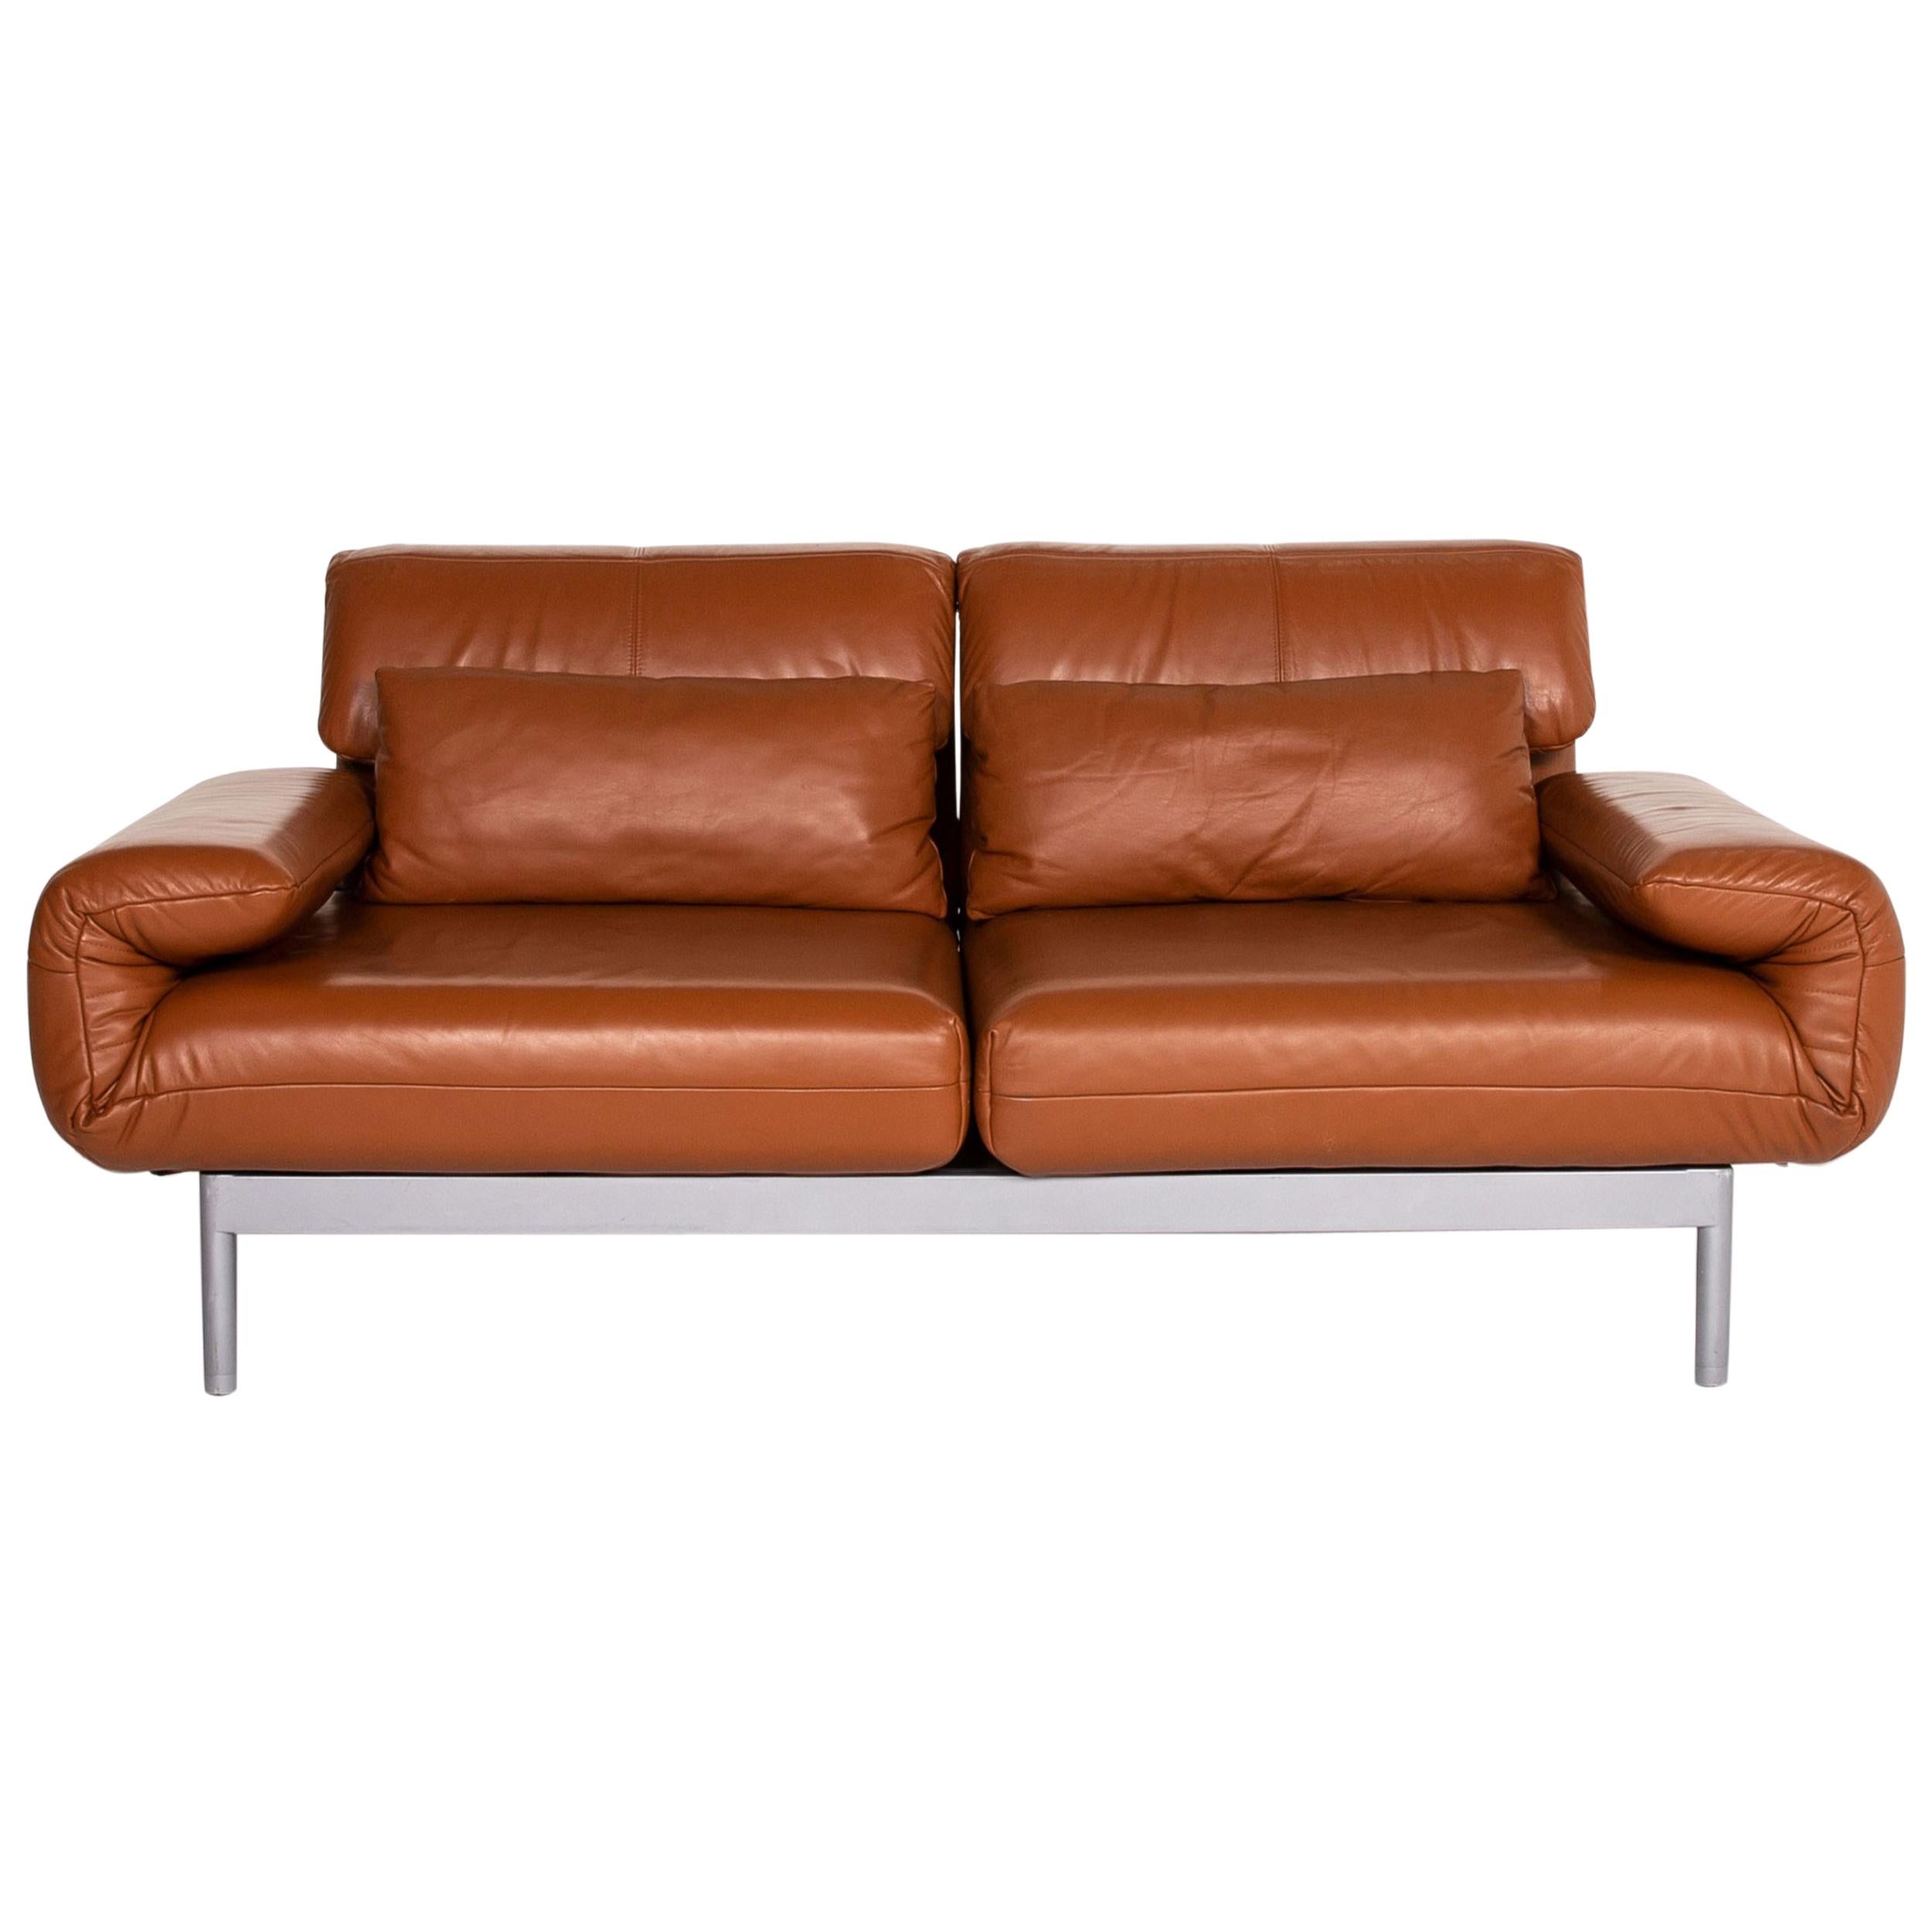 Rolf Benz Plura Leather Sofa Cognac Brown Two-Seat Function Relax Function